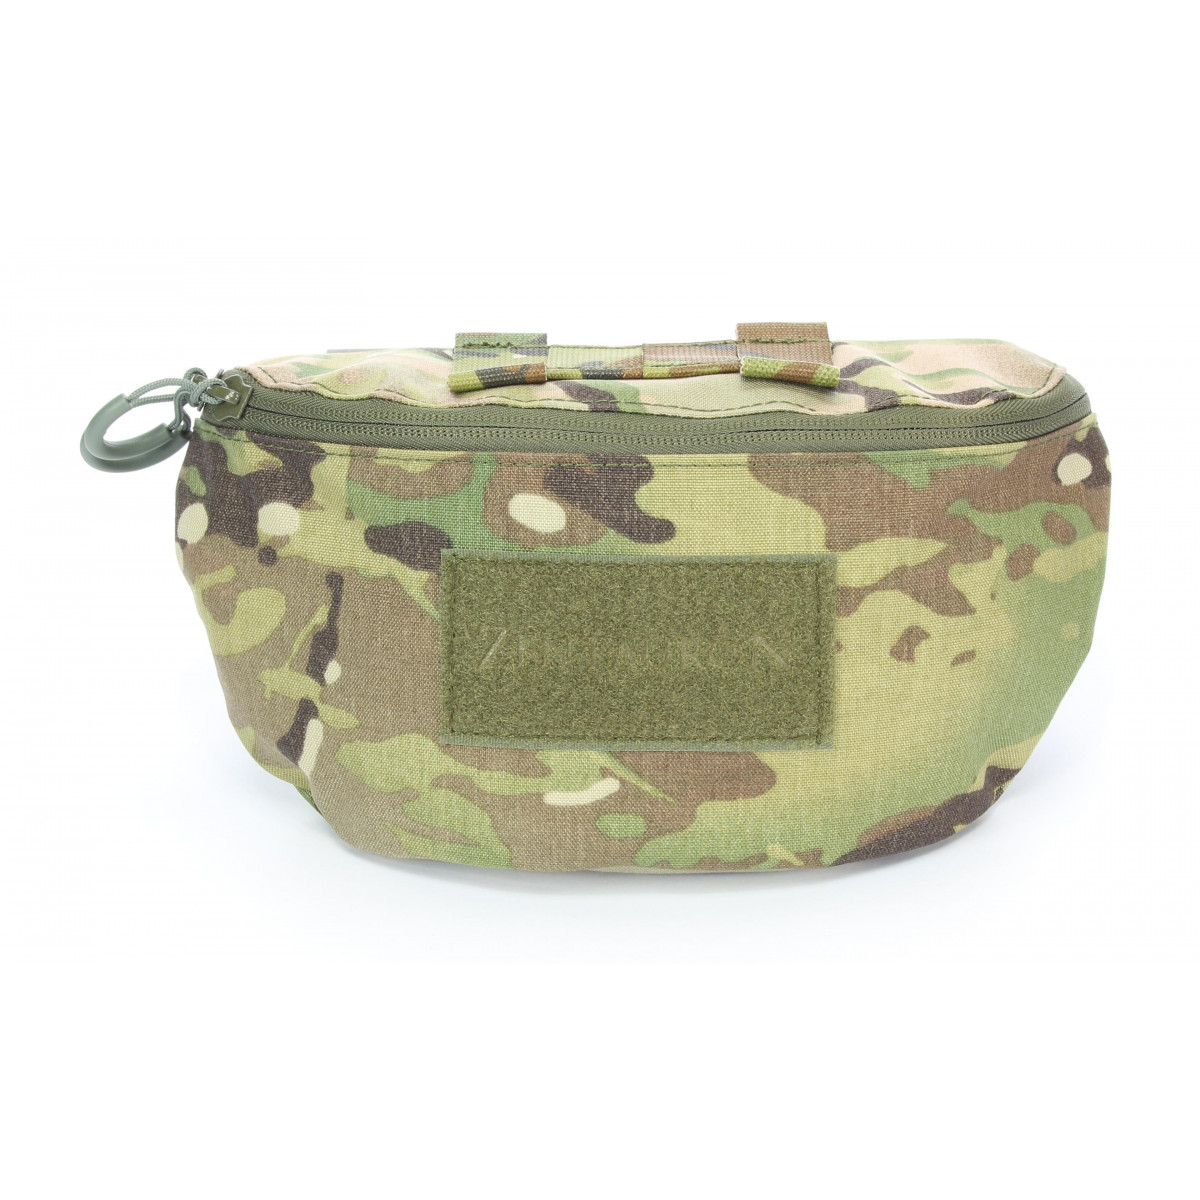 Drop down pouch for plate carrier with compartment for soft ballistics